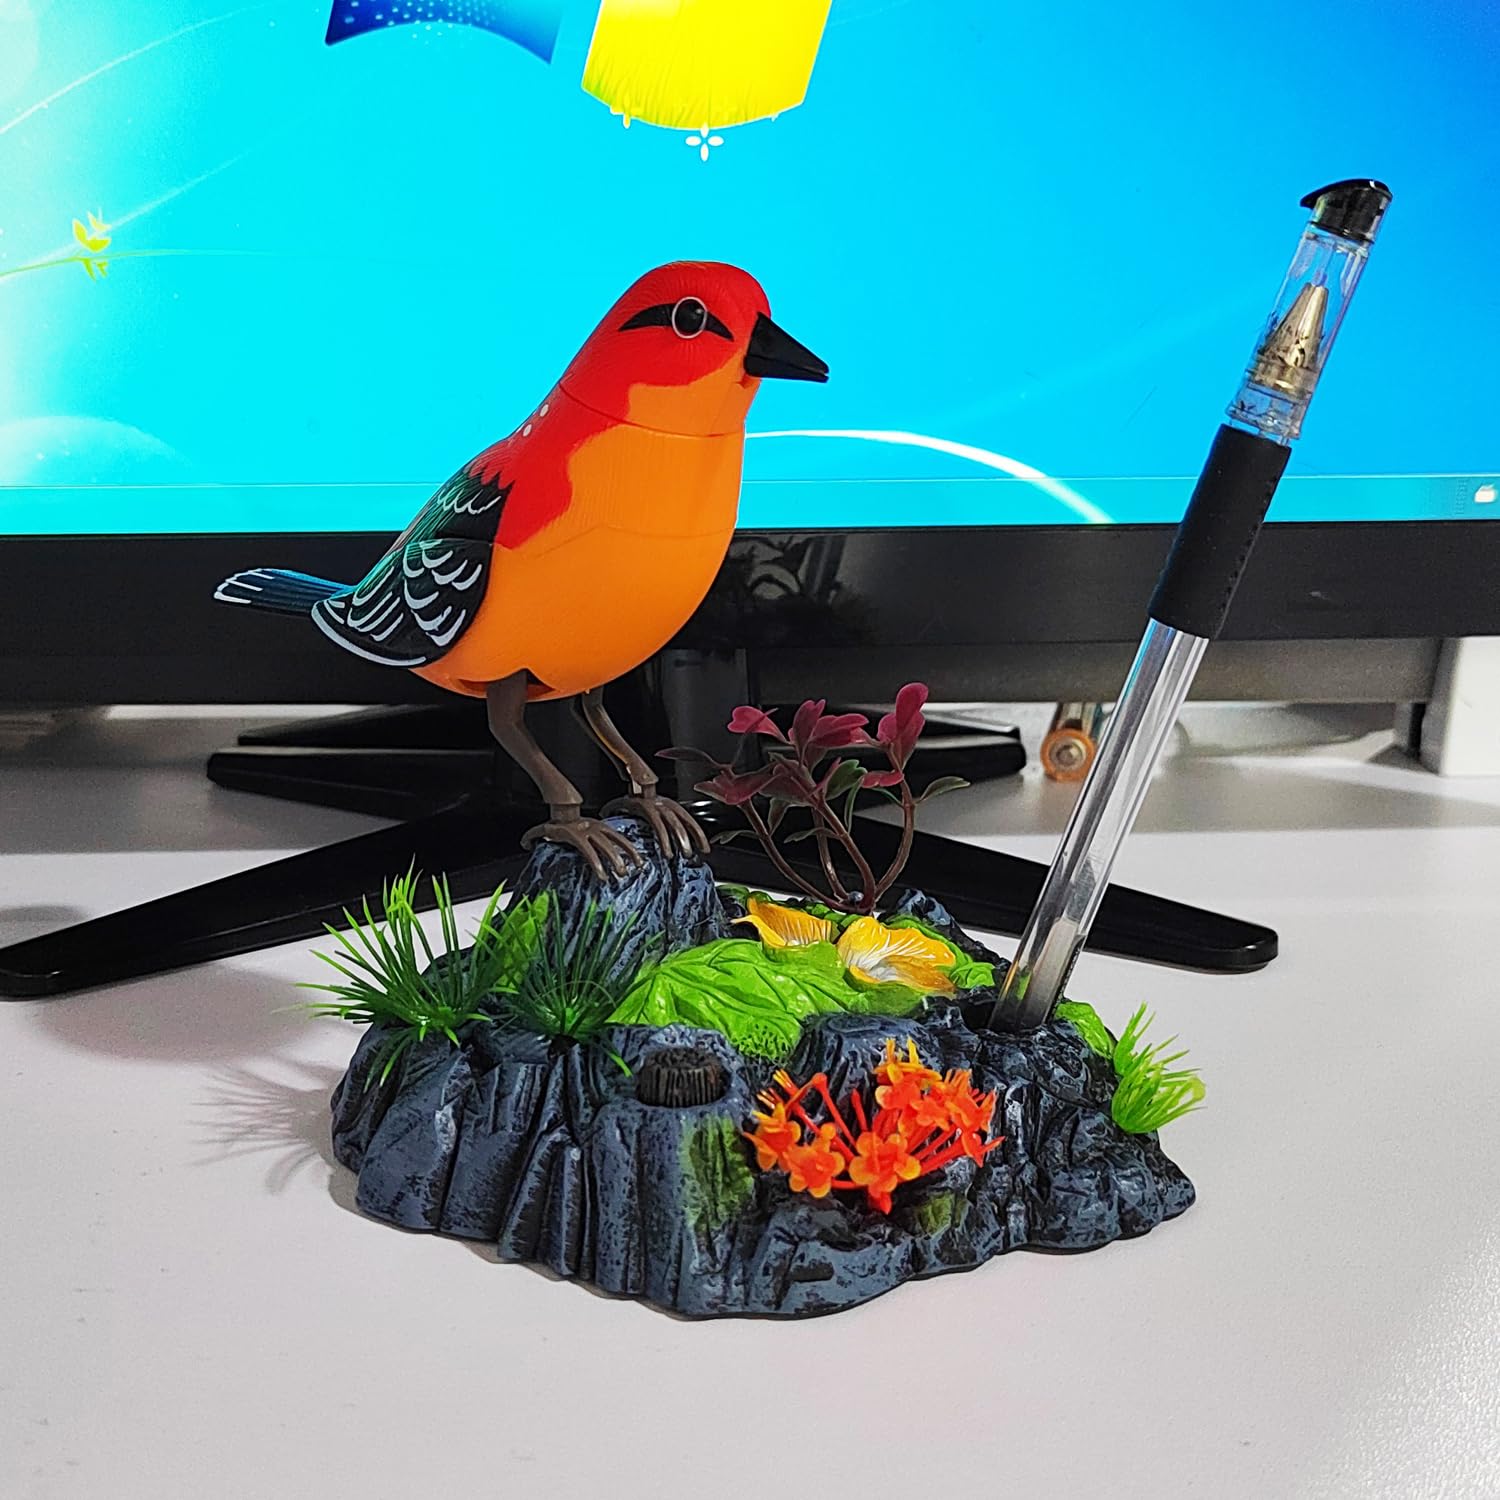 Tipmant Cute Electronic Birds Toys Pets Simulation Realistic Move Chirp Electric Office Home Desk Decor Decoration Kids Birthday Gifts (Red)